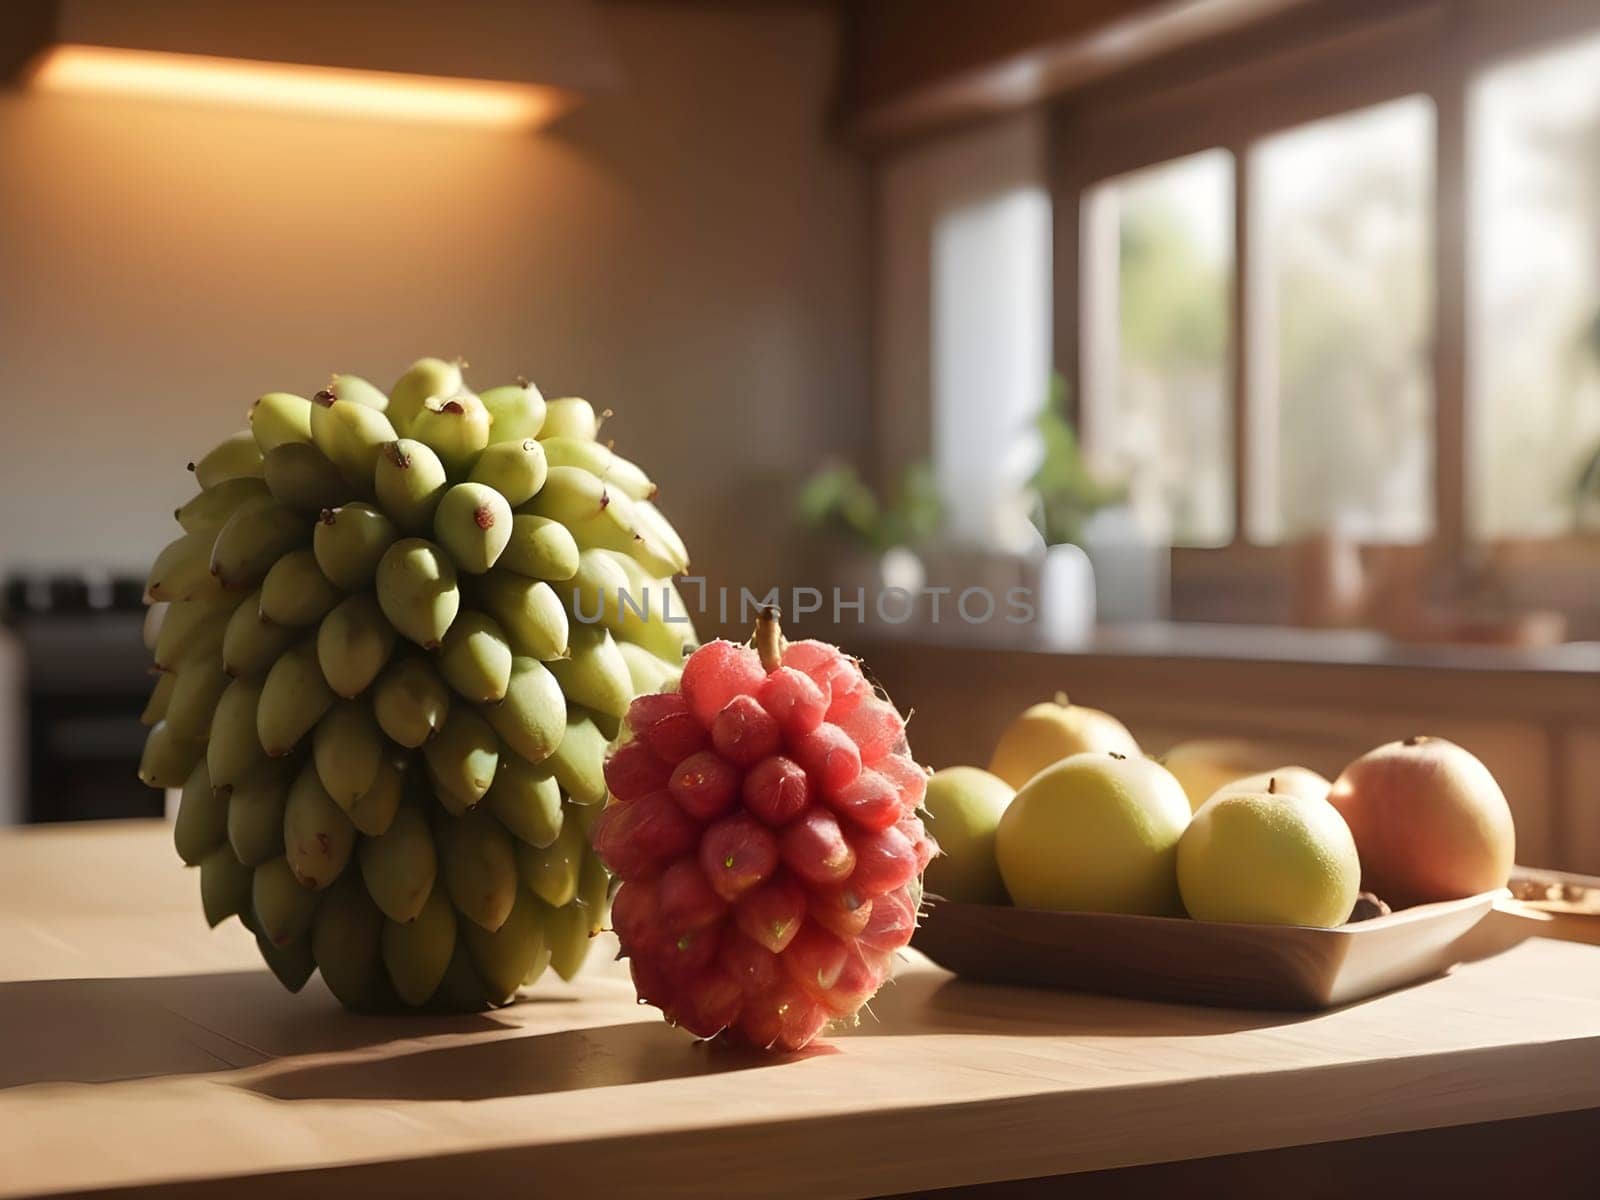 Tropical Ambiance: Longkong Fruit in Focus Amidst a Softly Lit Kitchen Glow.